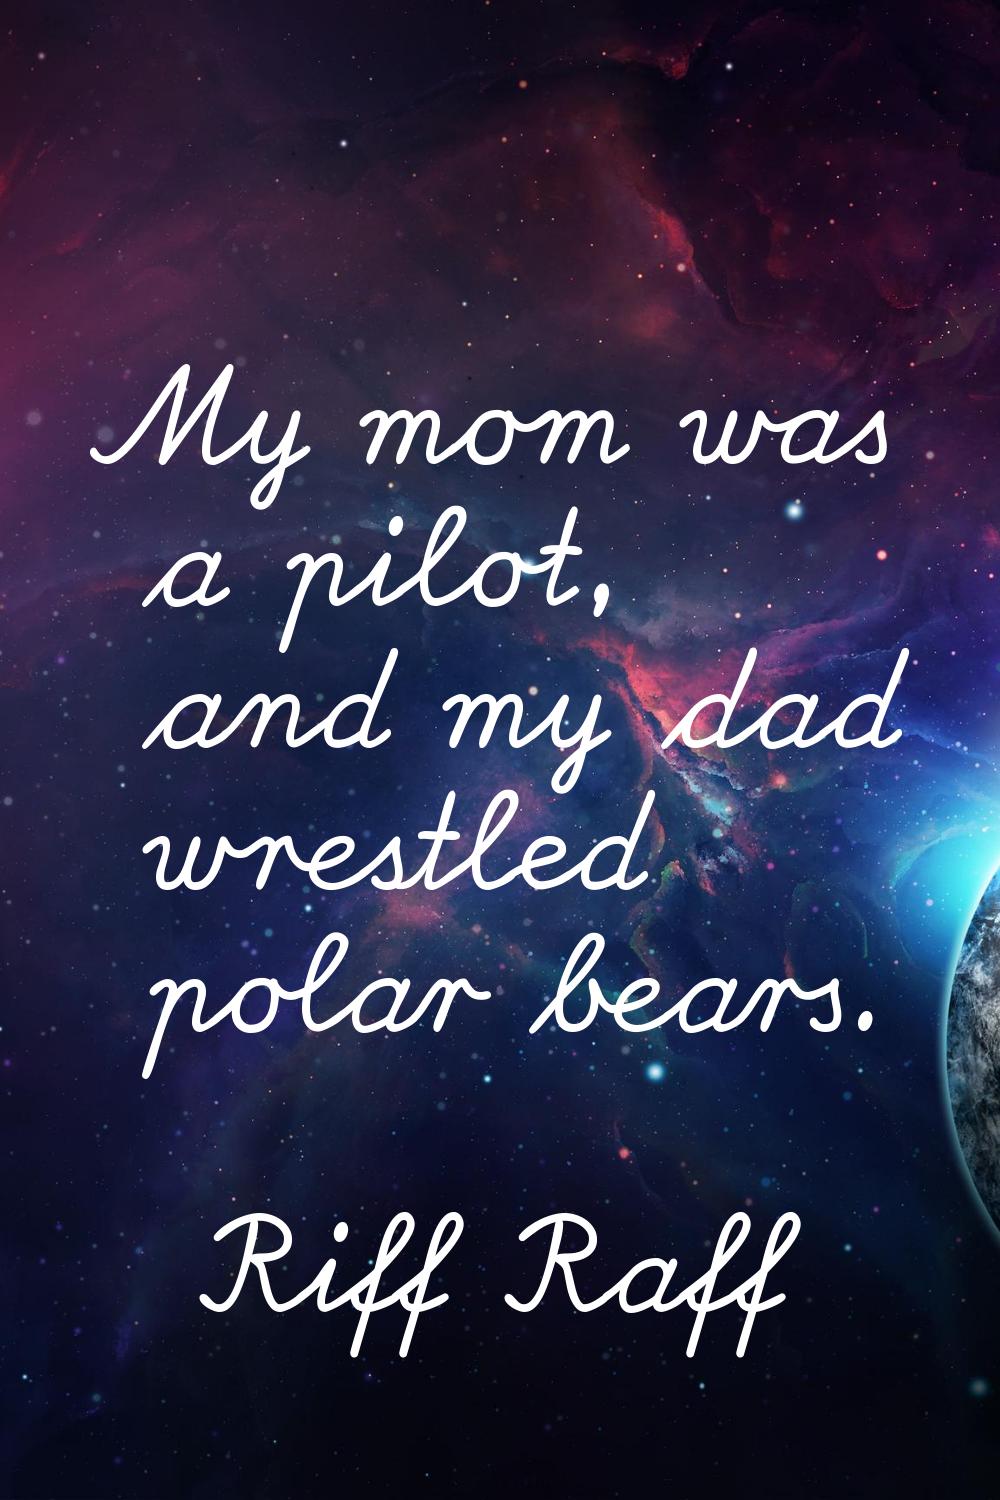 My mom was a pilot, and my dad wrestled polar bears.